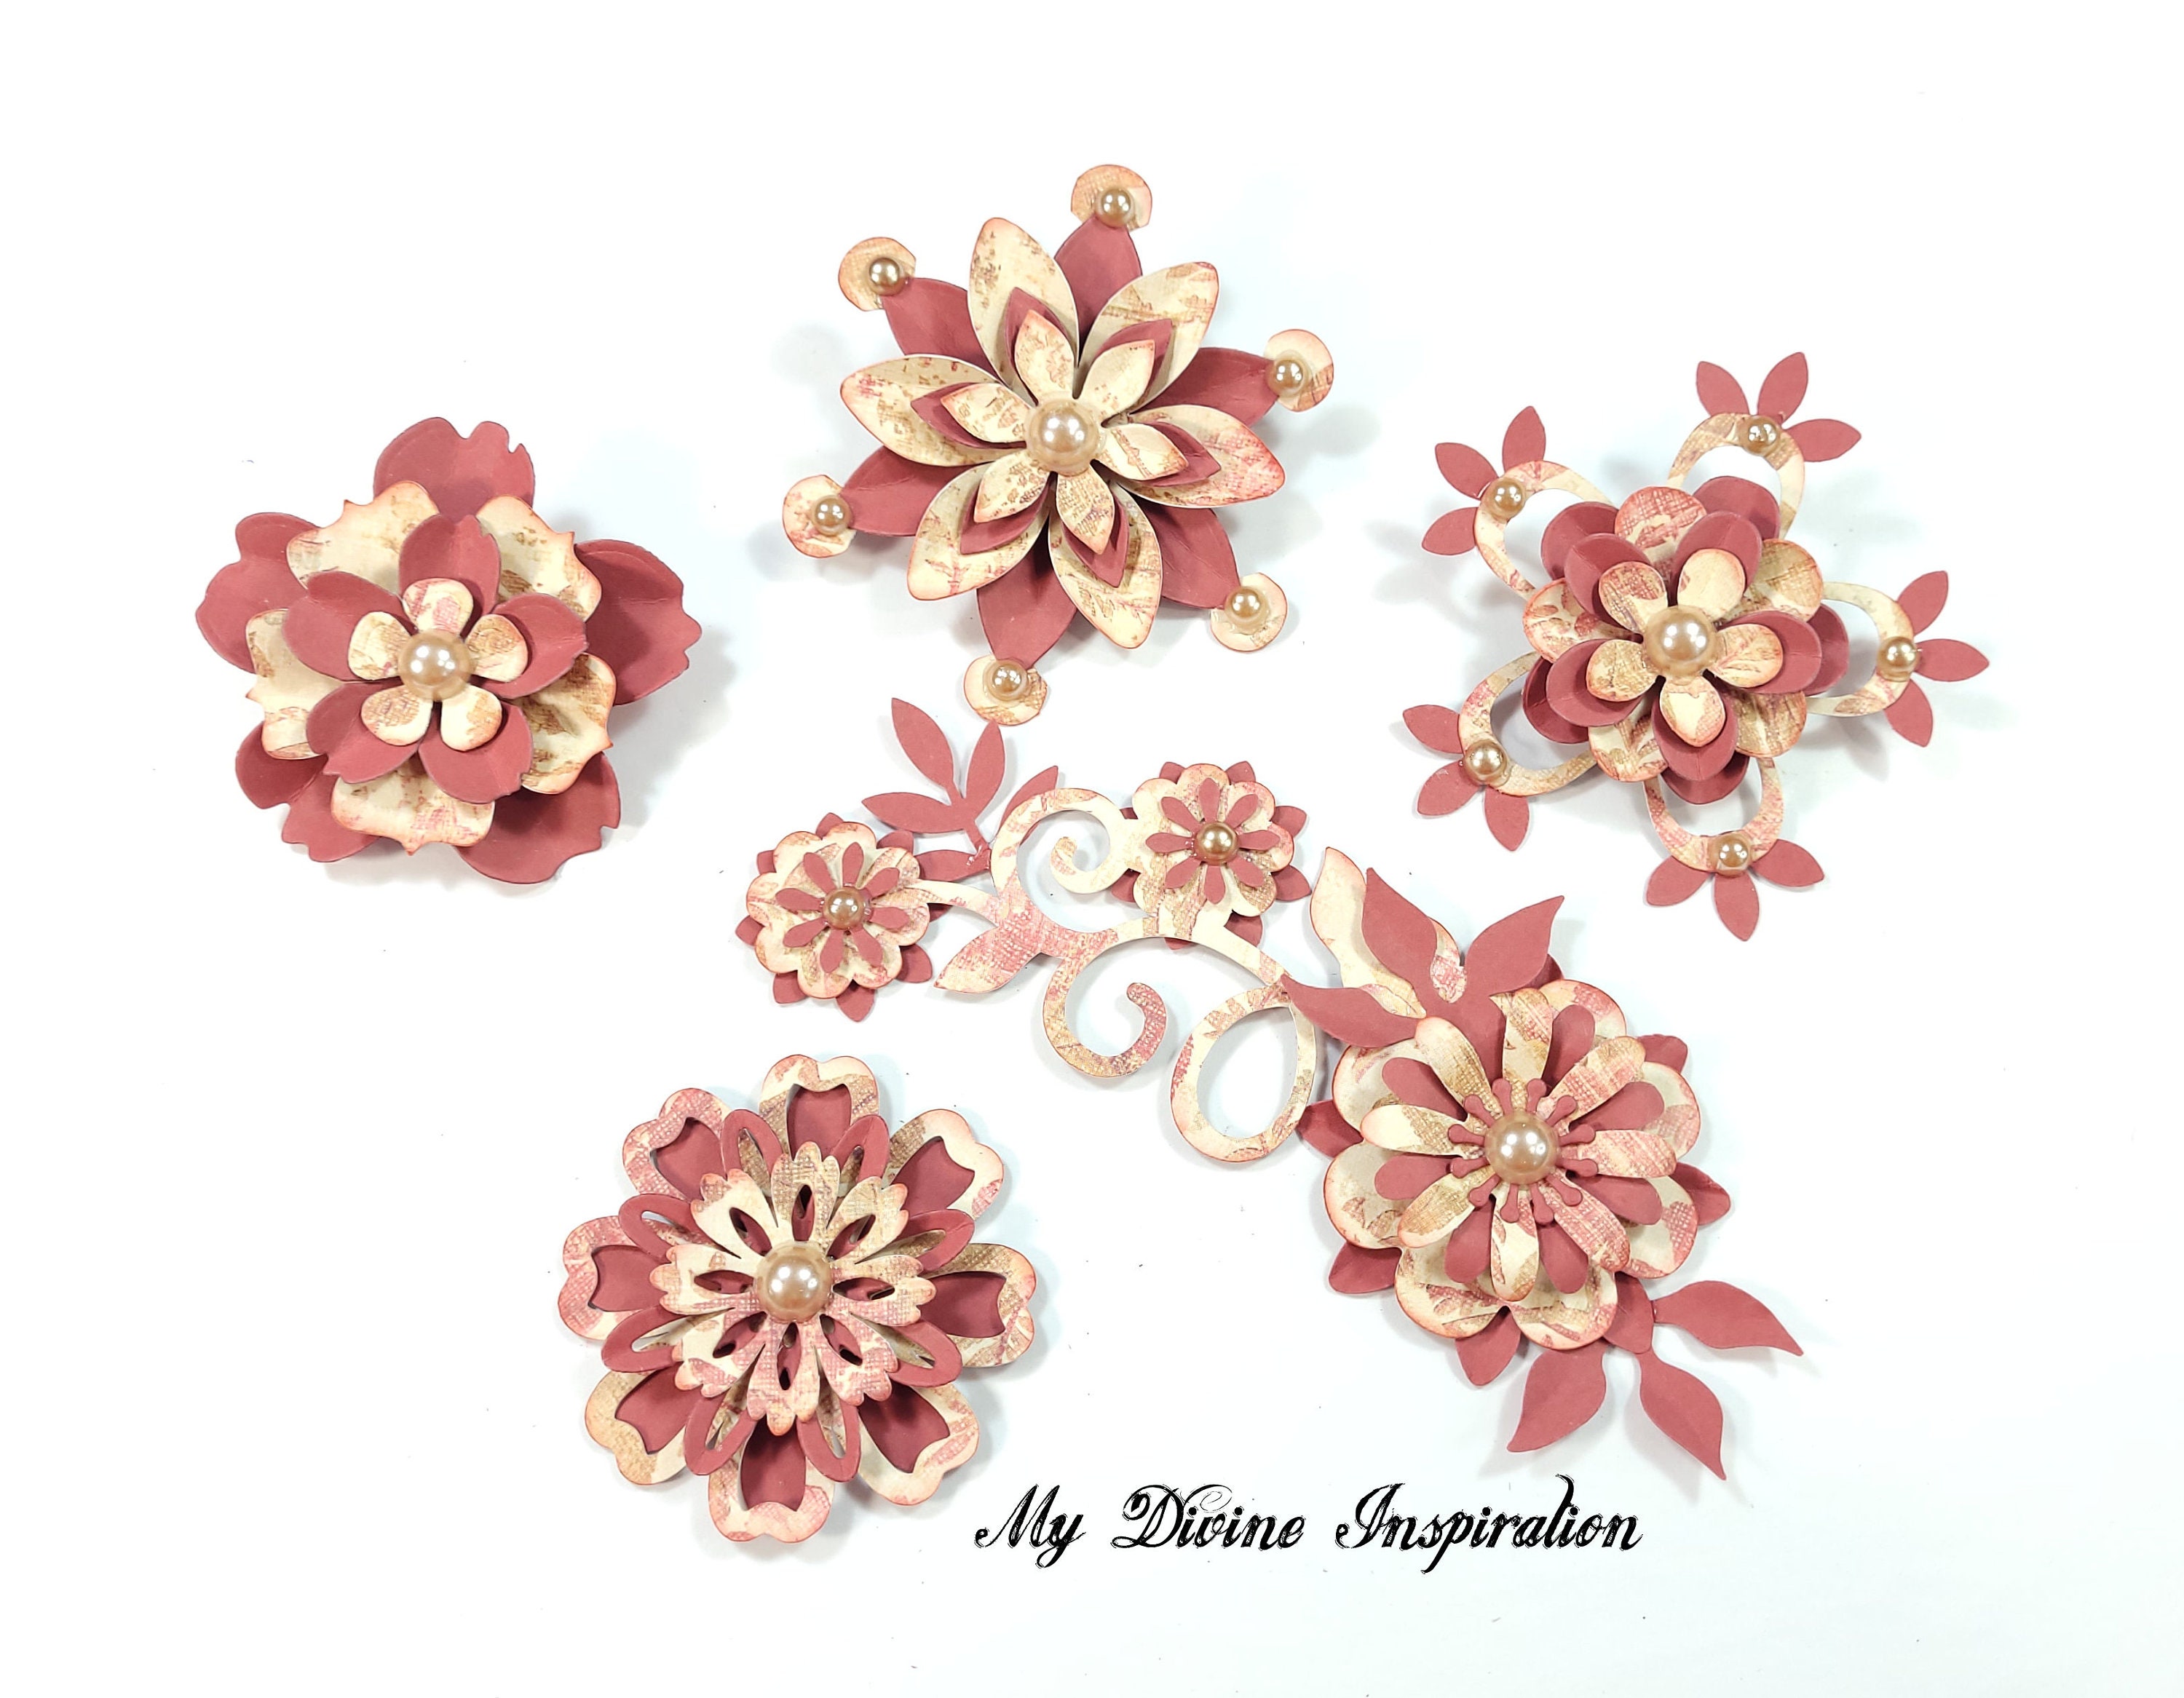 Beige & Ivory Paper Embellishments and Flowers for Scrapbooks Journals Cards A-3712 Elegant Burgundy Planners Crafts Mini Albums